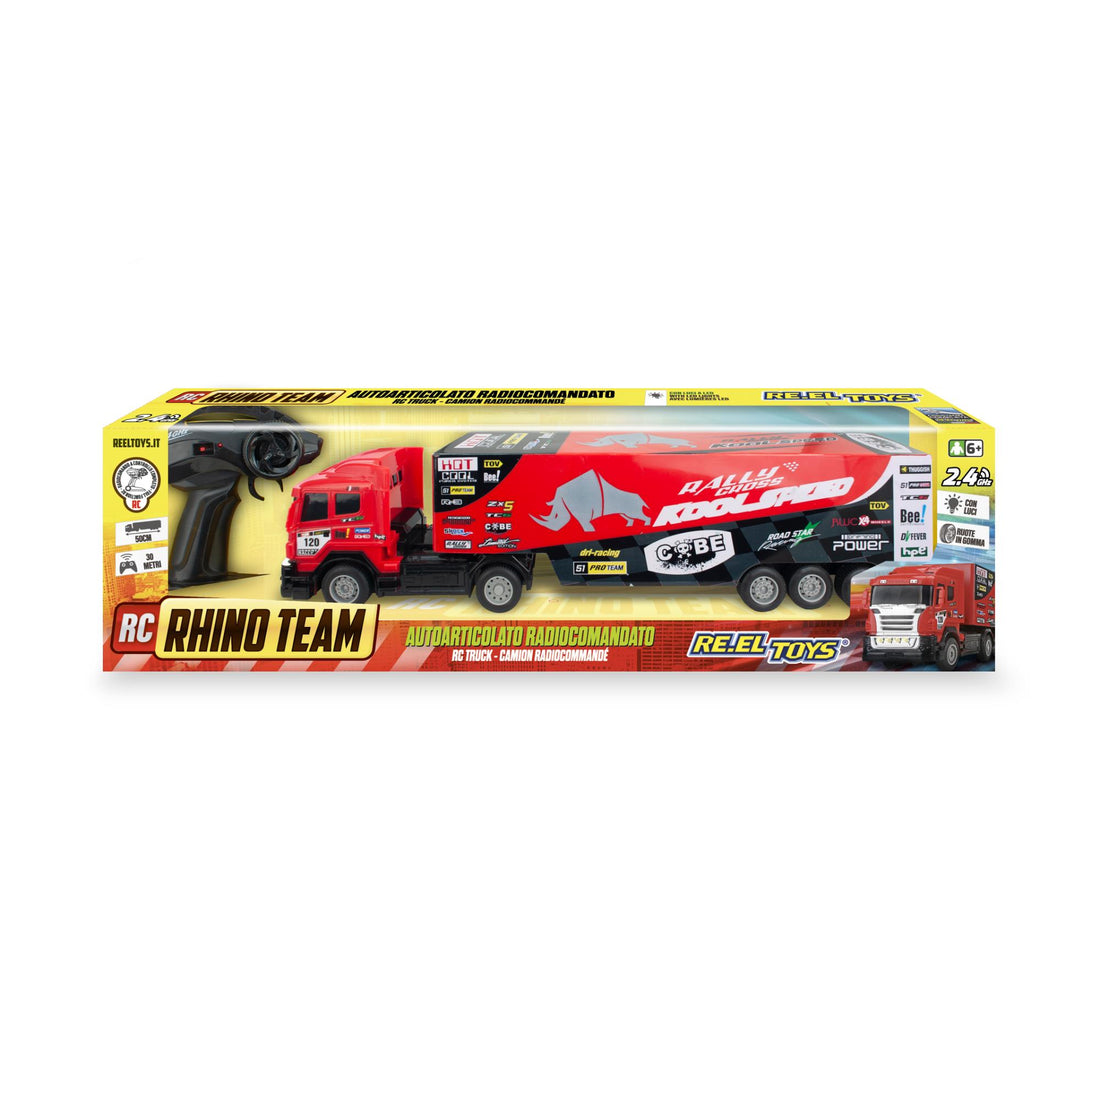 RHINO TEAM: Rc truck 2.4 GHz - with front lights